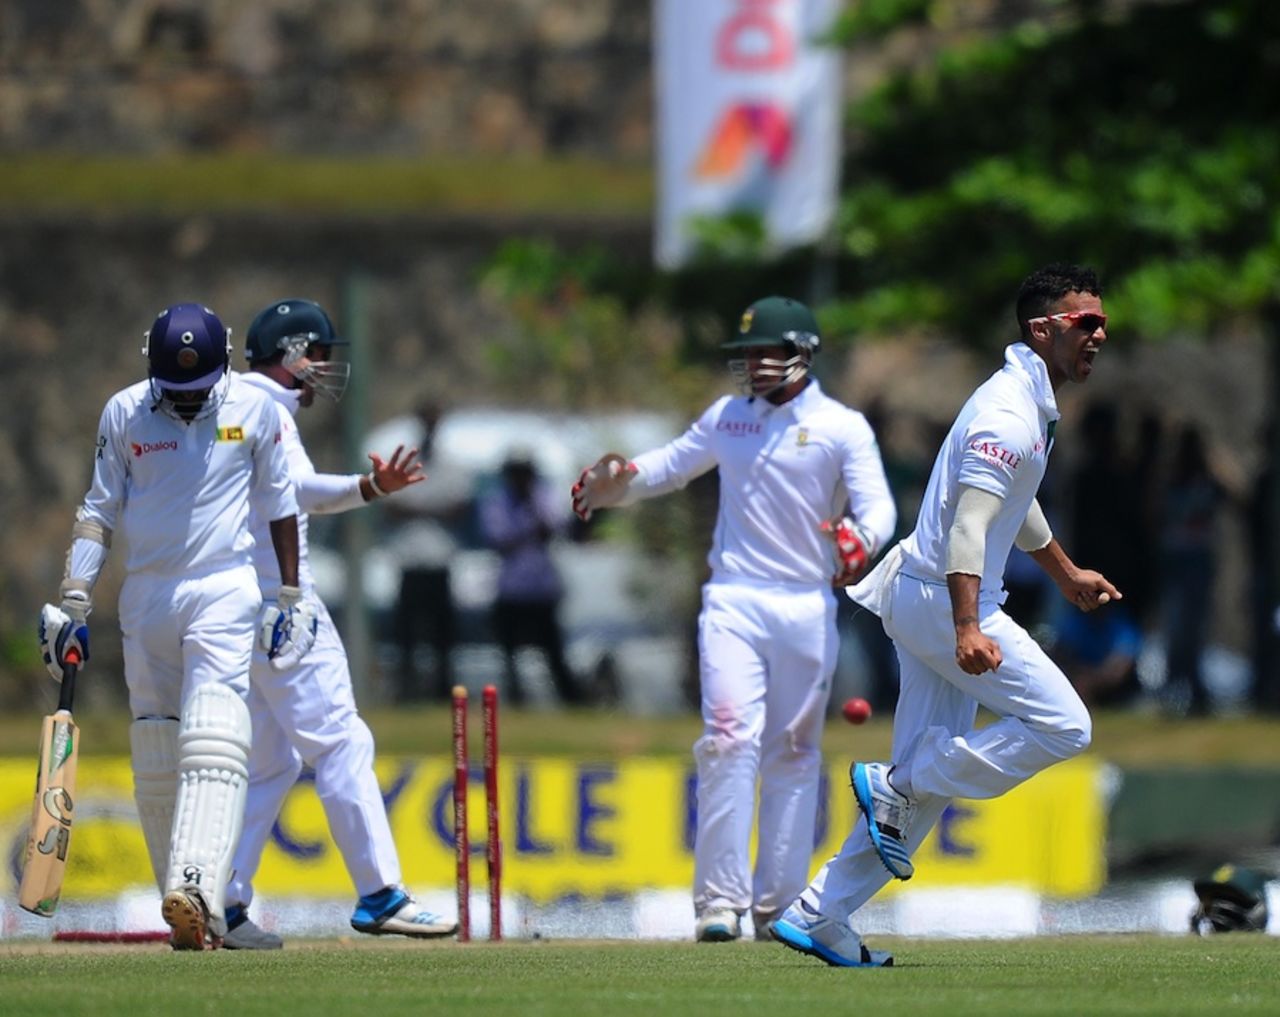 JP Duminy had Upul Tharanga stumped after lunch, Sri Lanka v South Africa, 1st Test, Galle, 3rd day, July 18, 2014